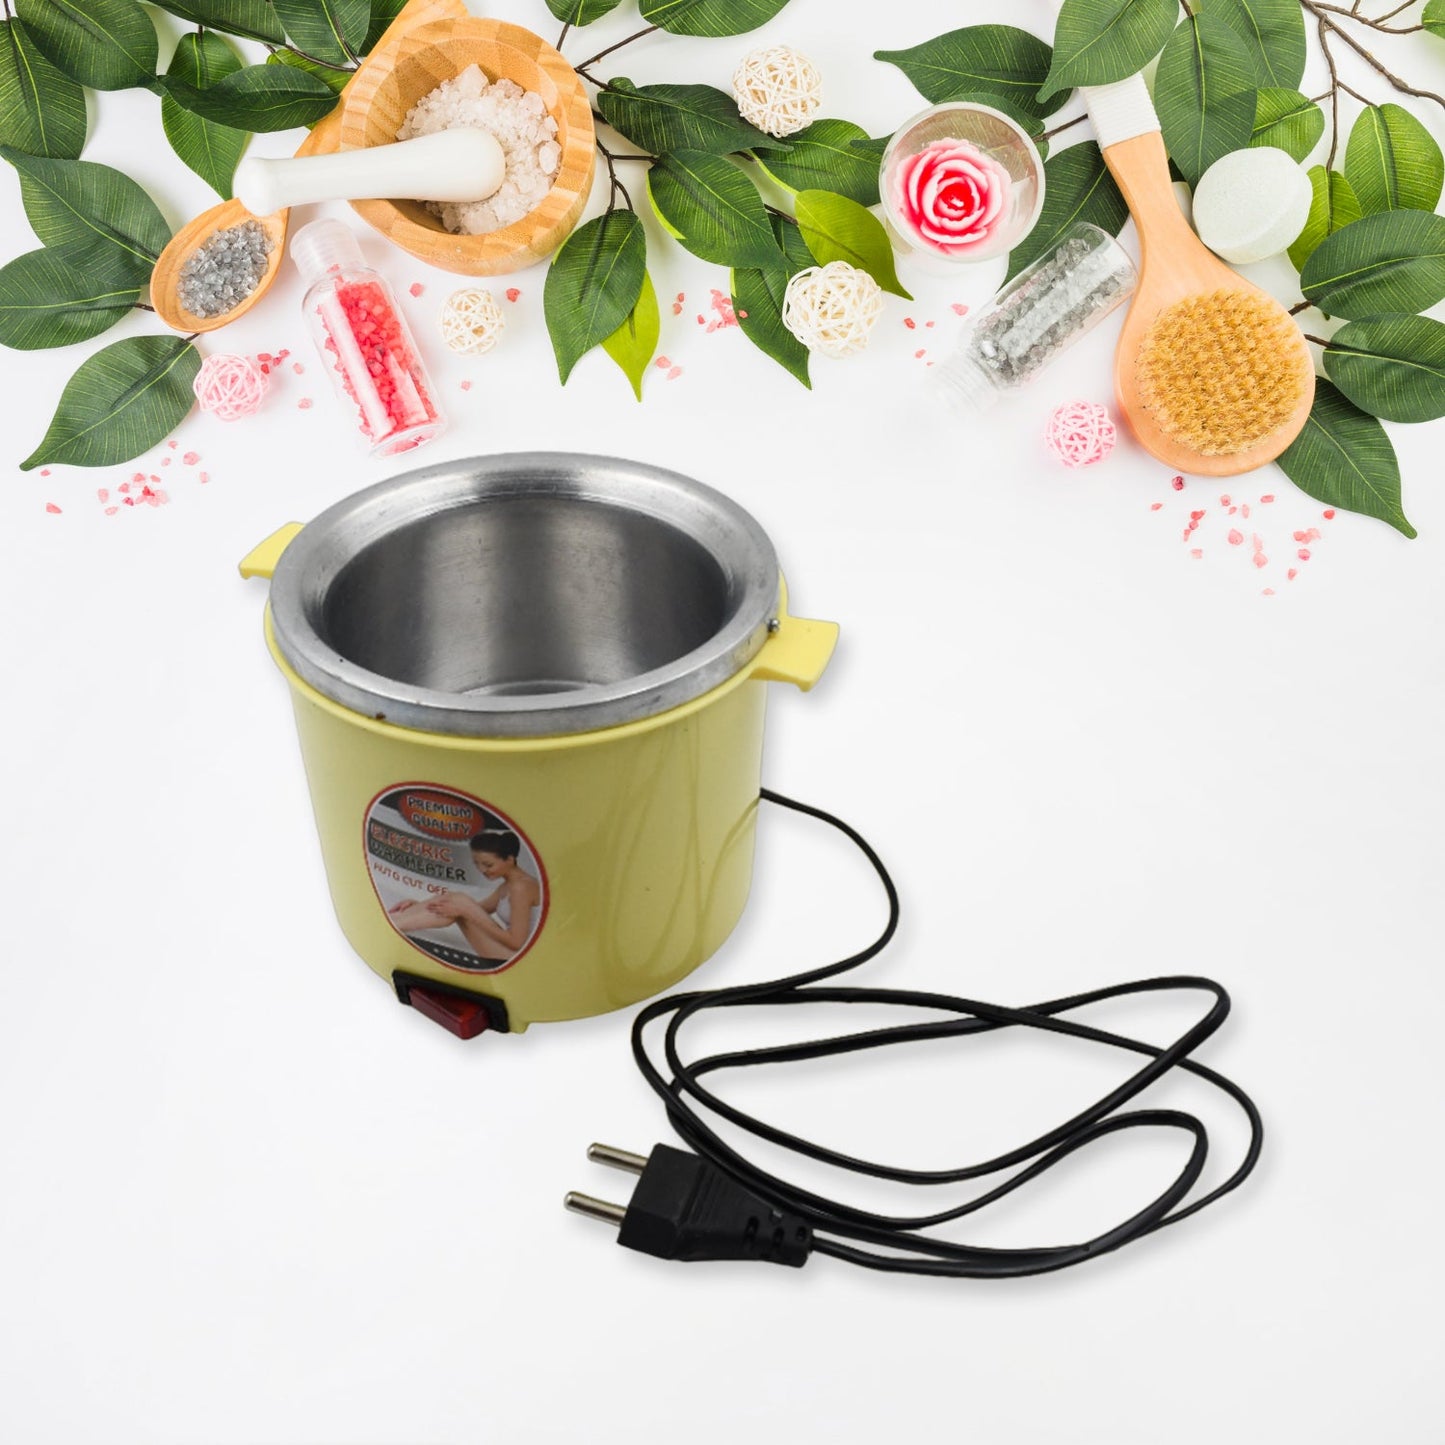 8325 Wax Heating Machine, Reliable and Convenient to Use Wax Warmer 240W Wax Machine EU Plug 220V Durable and Practical for Parlour, Salon for Home